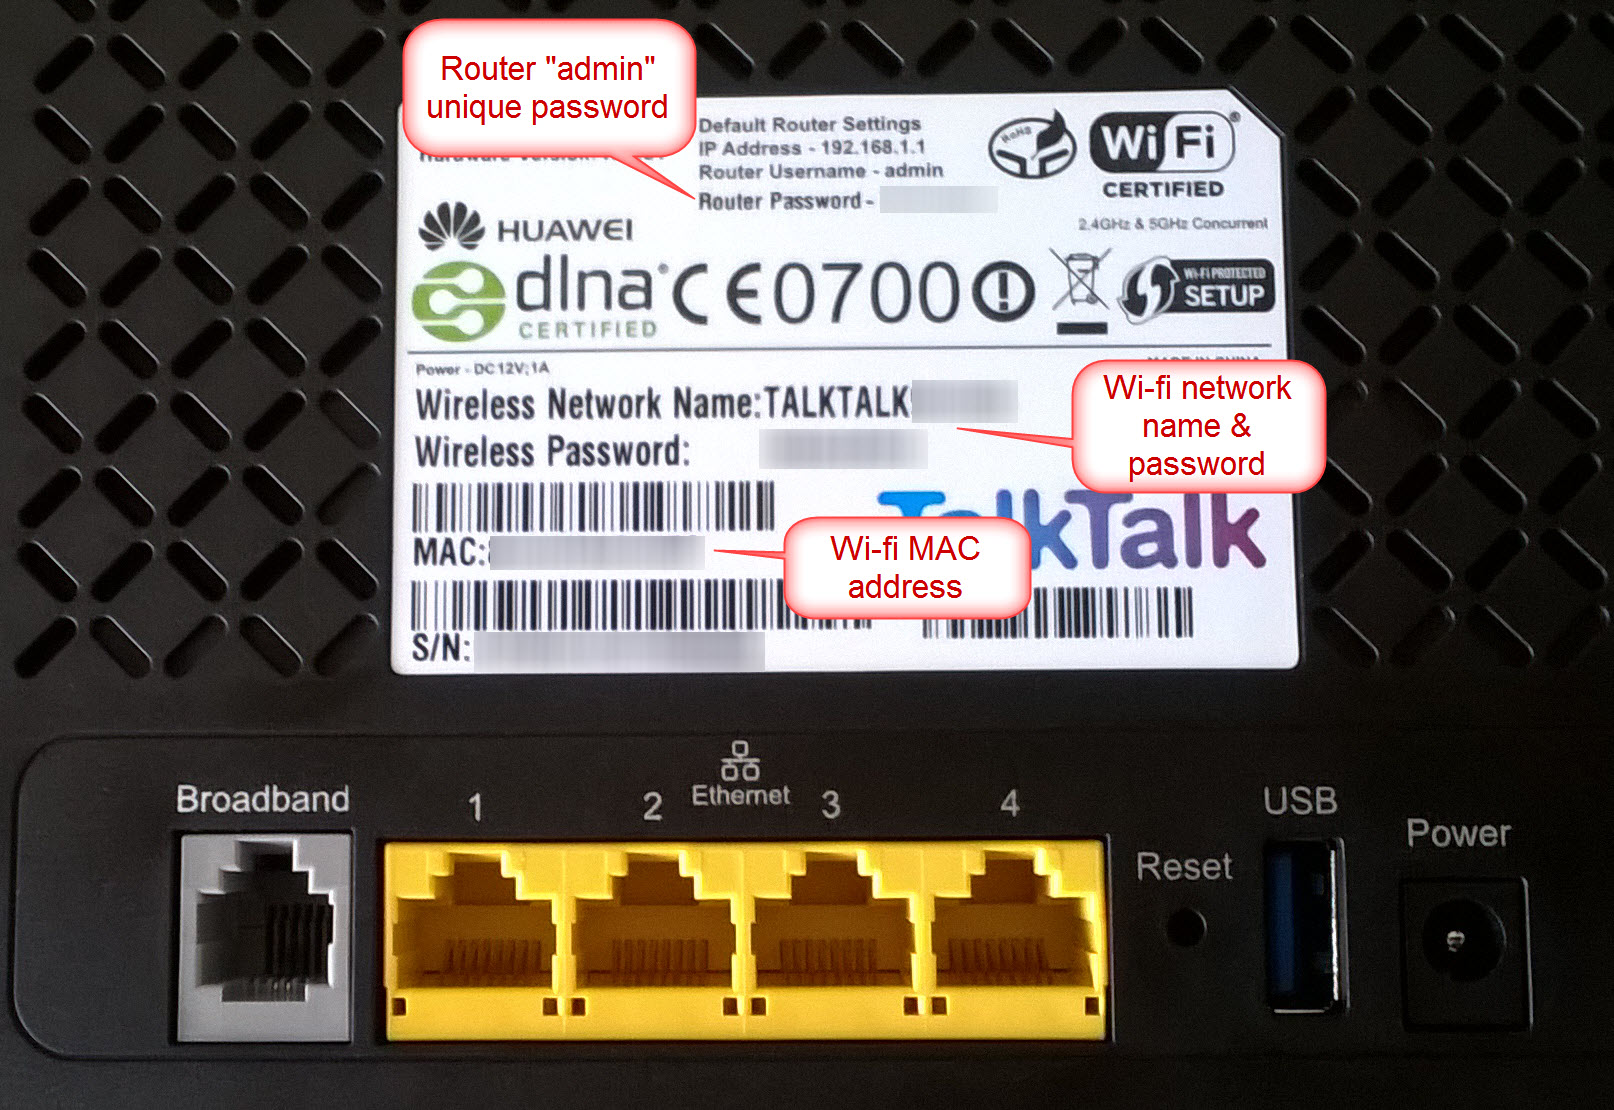 I can't connect my pc to HG633 router, iPad, TVs &... - TalkTalk Help